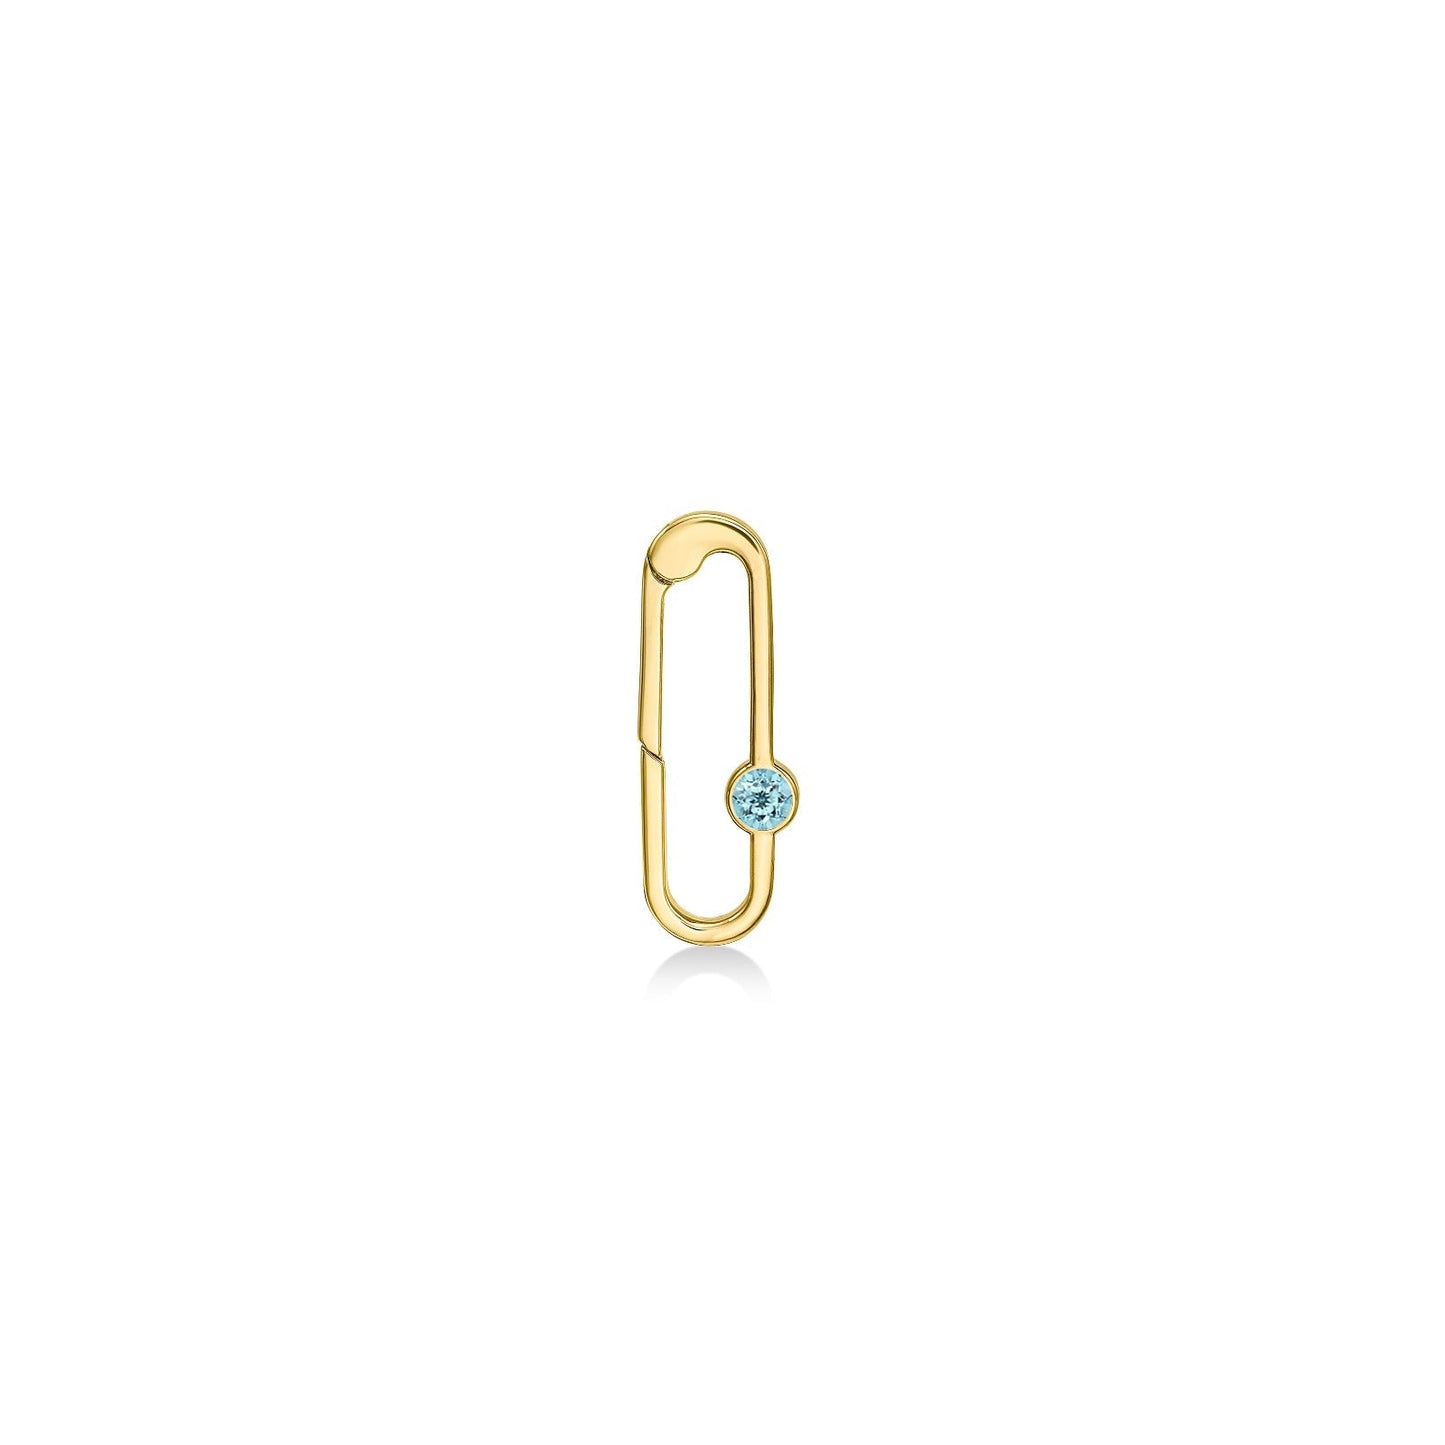 14k gold paperclip charm lock with aquamarine